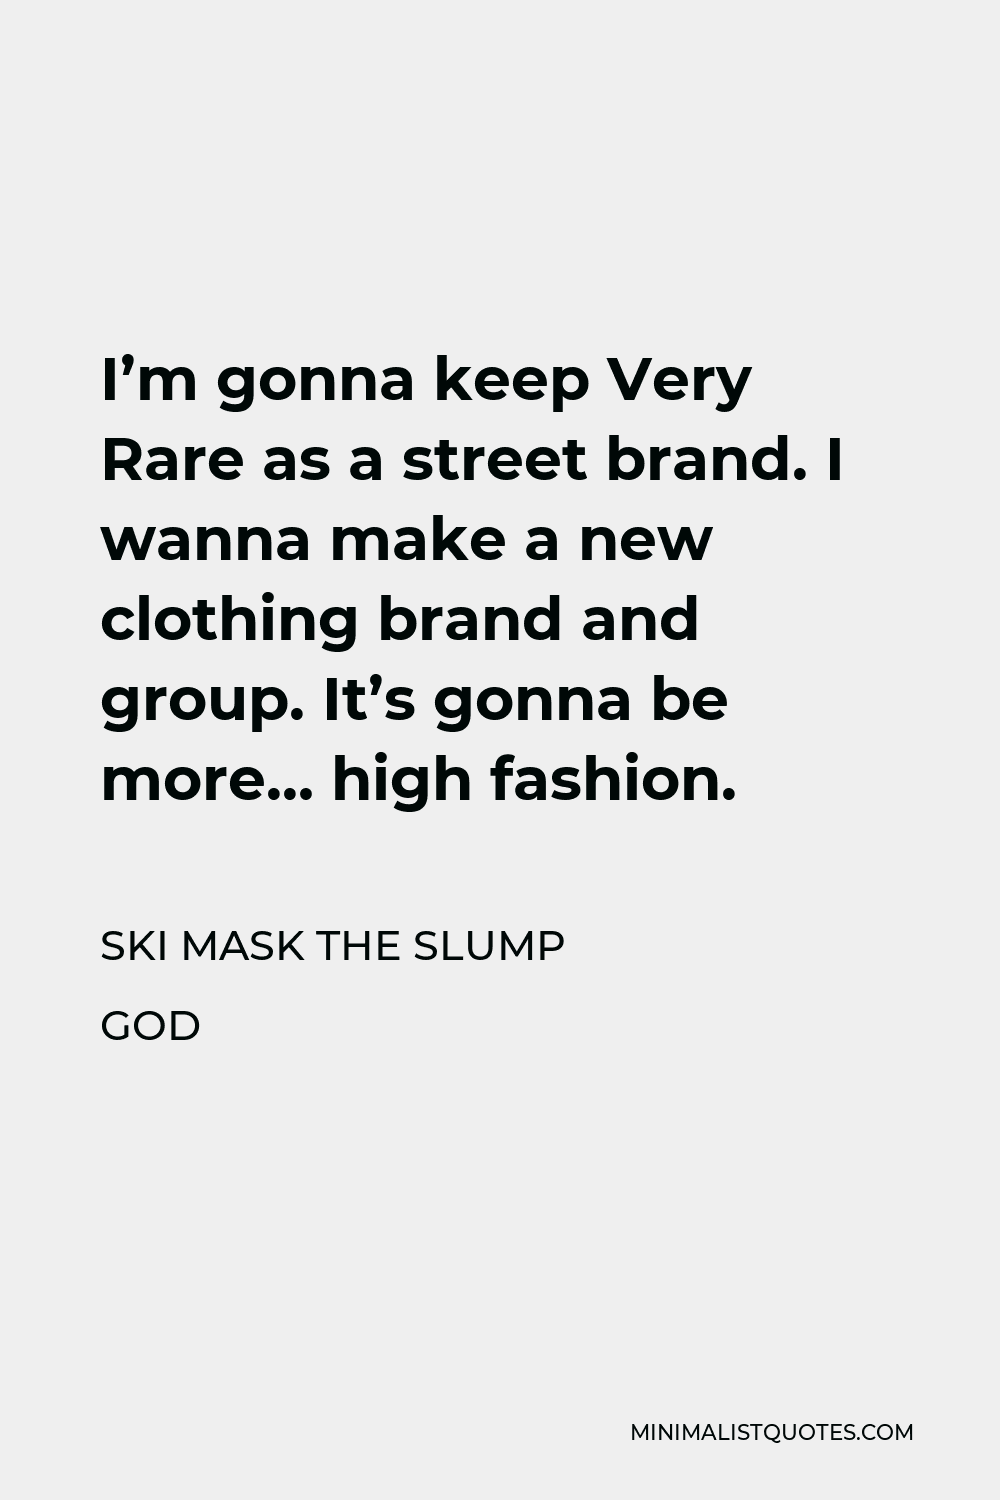 Ski Mask the Slump God Quote - I’m gonna keep Very Rare as a street brand. I wanna make a new clothing brand and group. It’s gonna be more… high fashion.